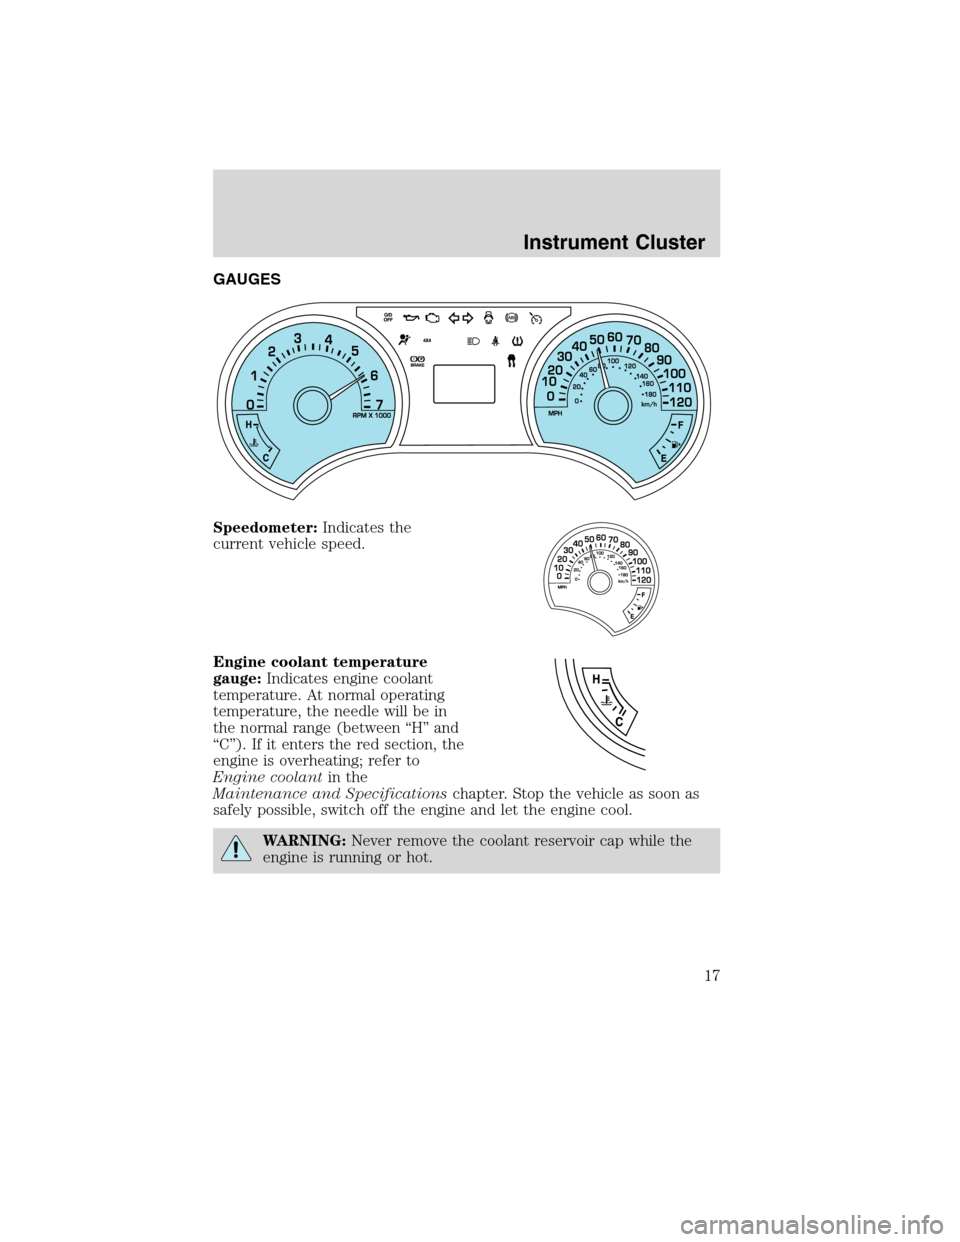 Mercury Mountaineer 2010  s User Guide GAUGES
Speedometer:Indicates the
current vehicle speed.
Engine coolant temperature
gauge:Indicates engine coolant
temperature. At normal operating
temperature, the needle will be in
the normal range (